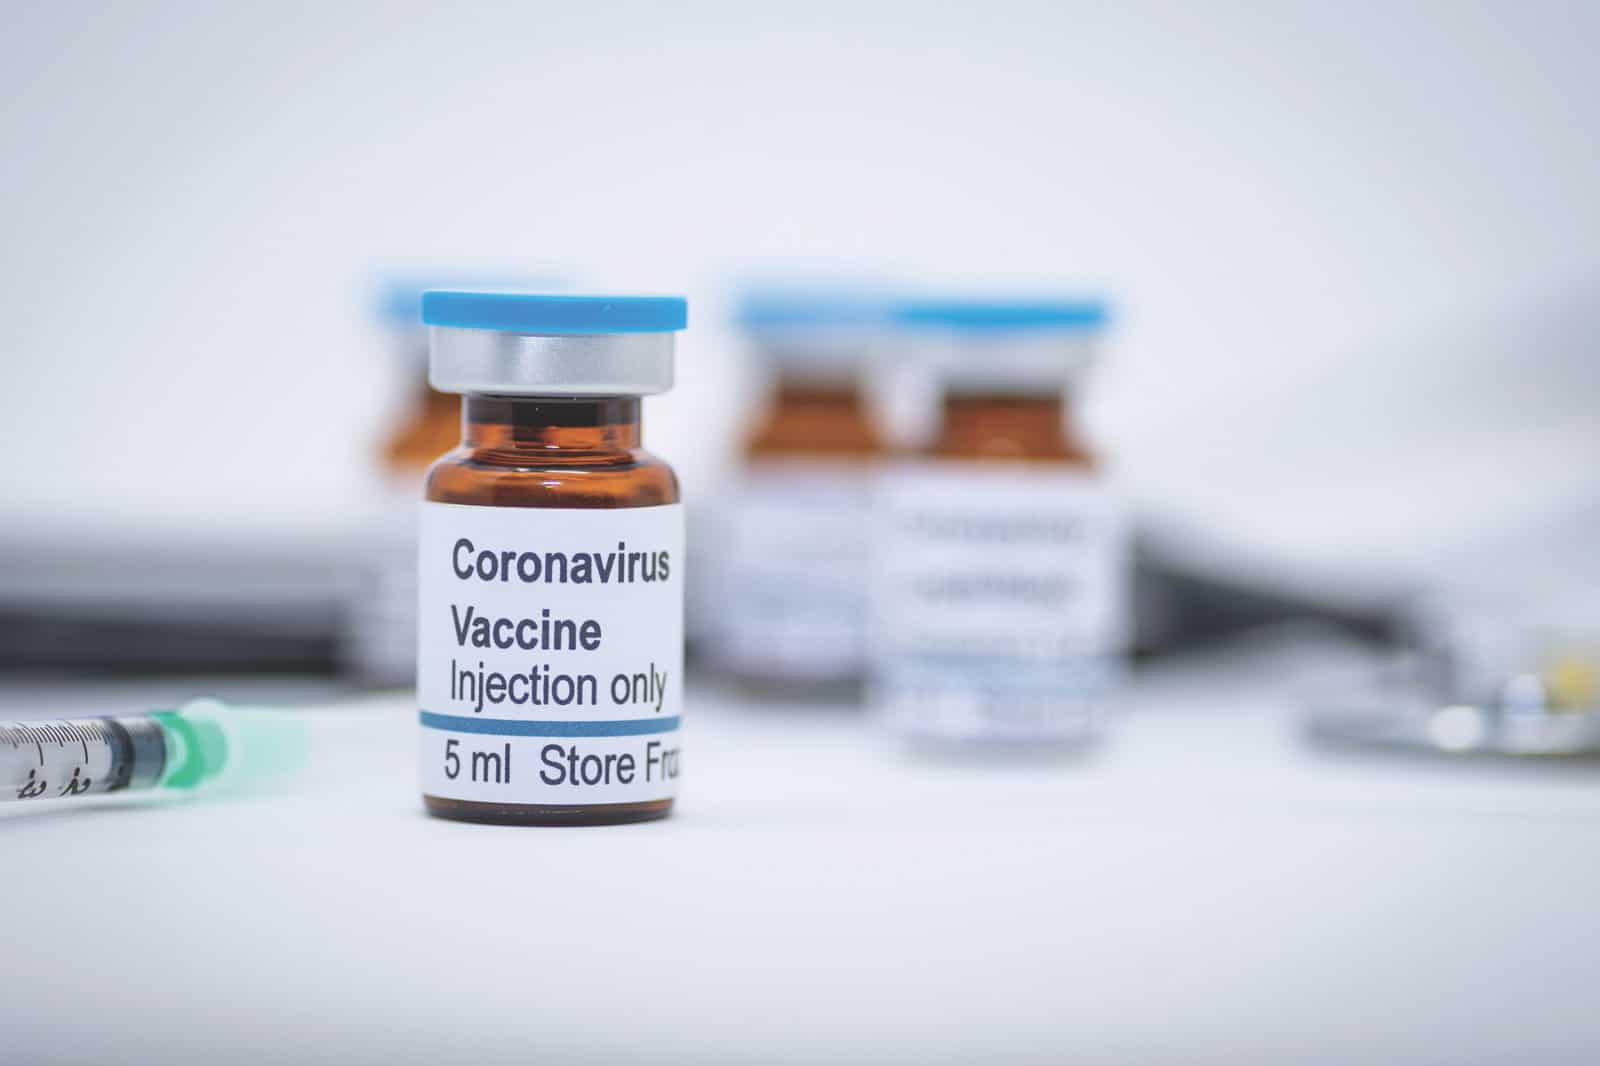 Oxford Likely to Release the World’s First Coronavirus Vaccine